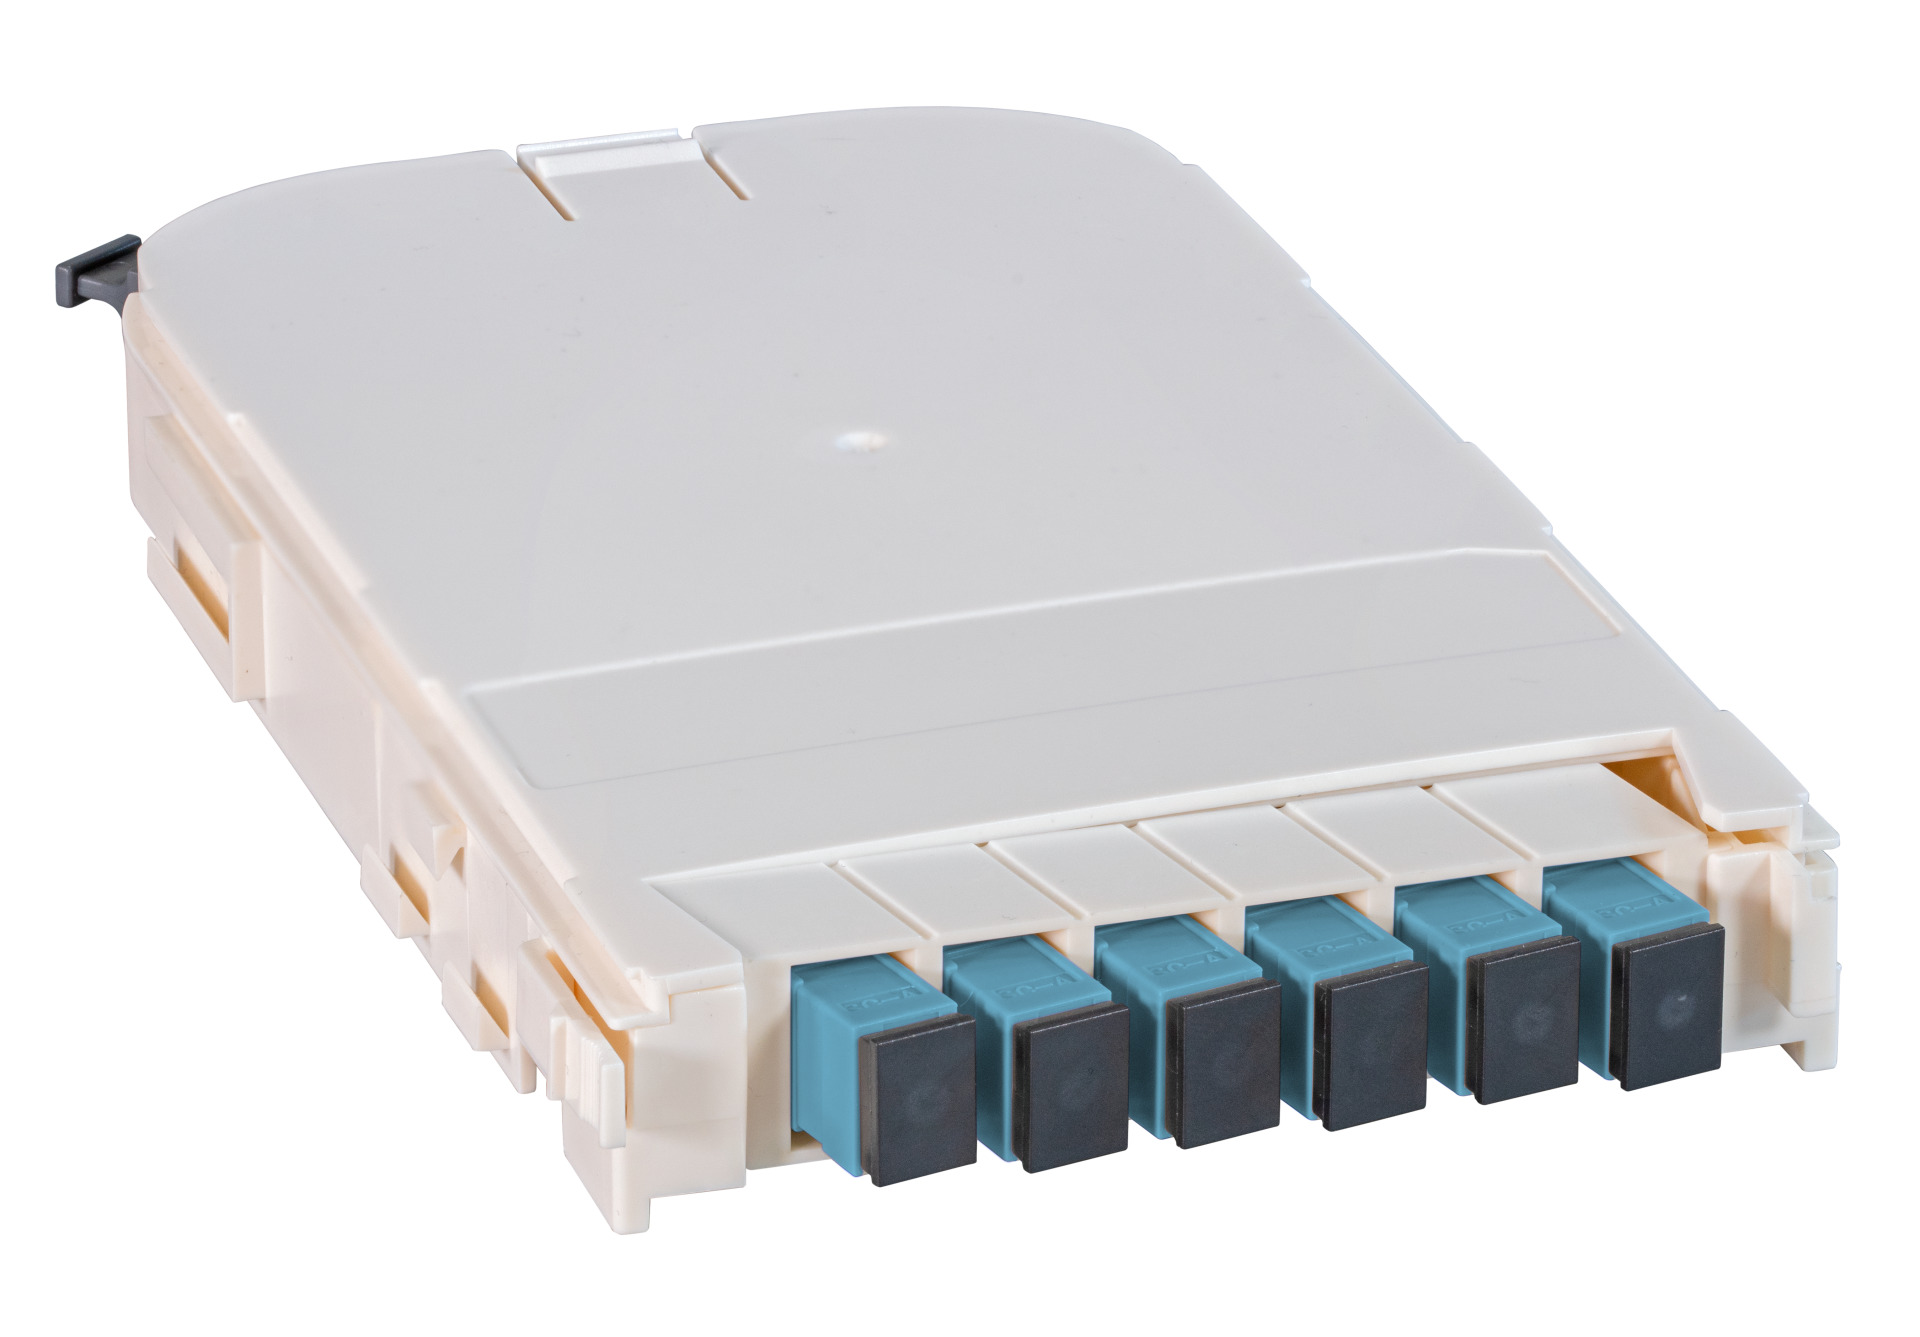 FTTH Module for FTTH-BGT, 6 Port SC with OM3 ceramic adapter